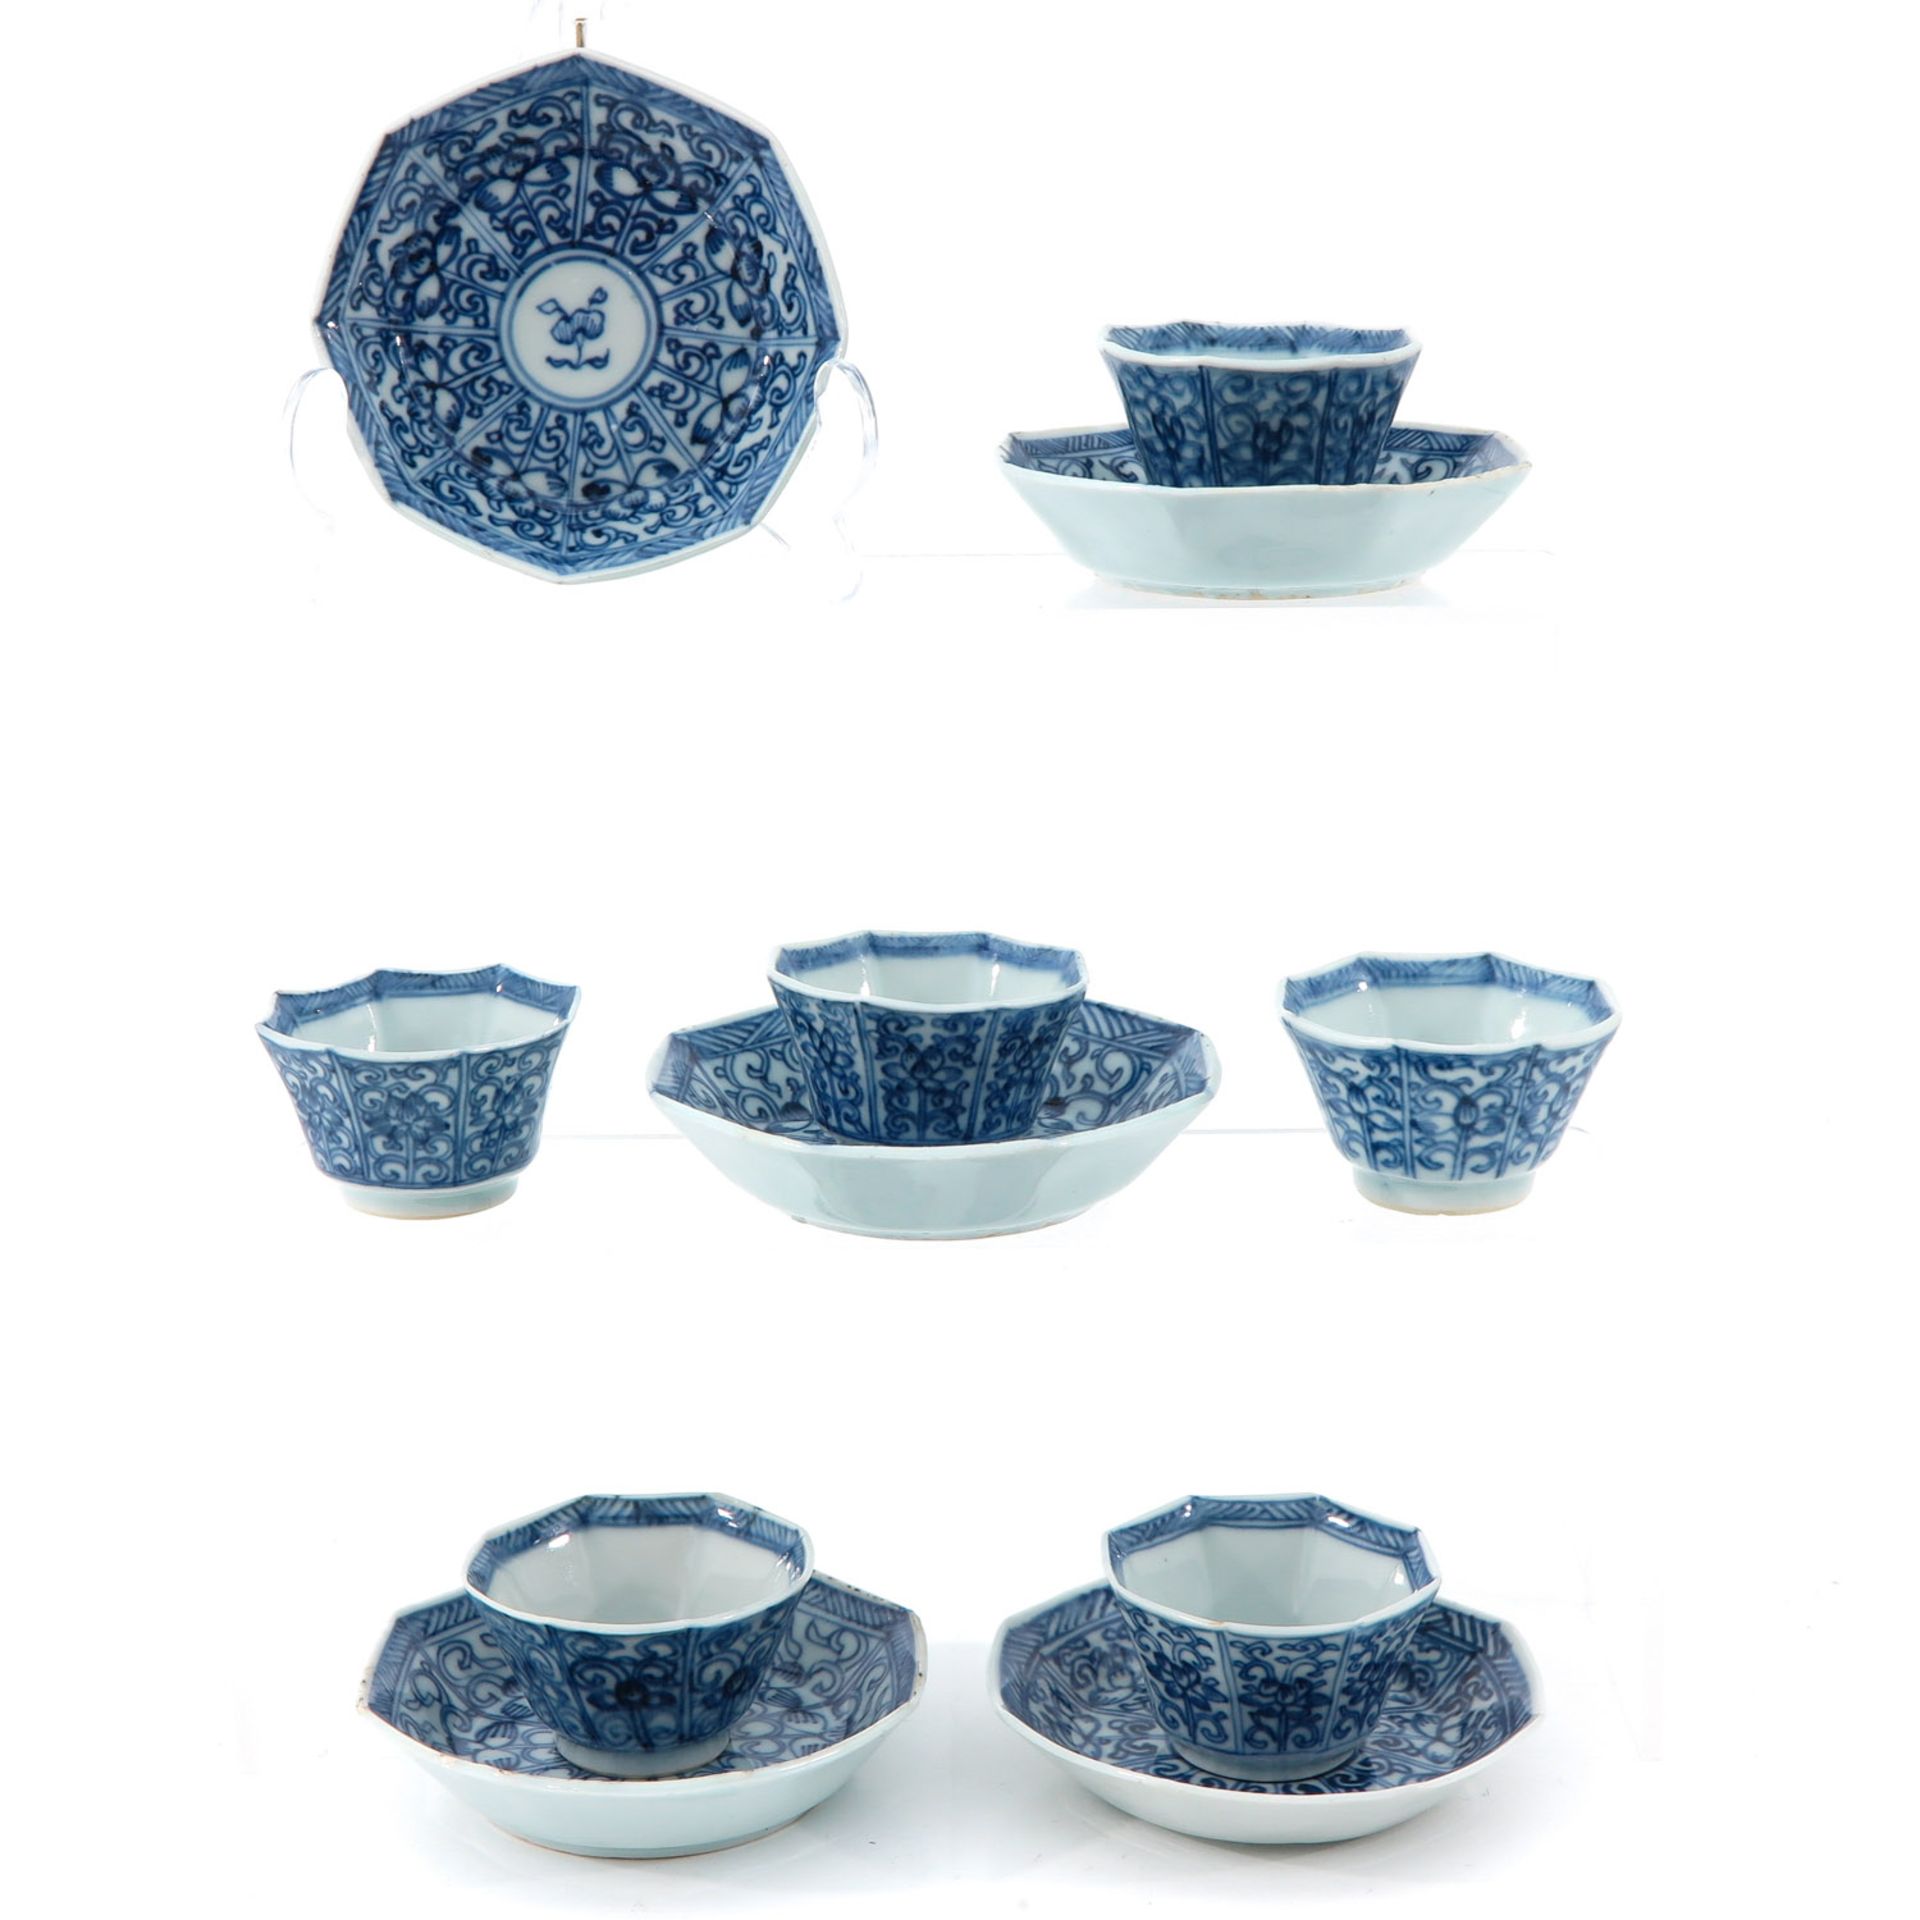 A Series of 6 Cups and 5 Saucers